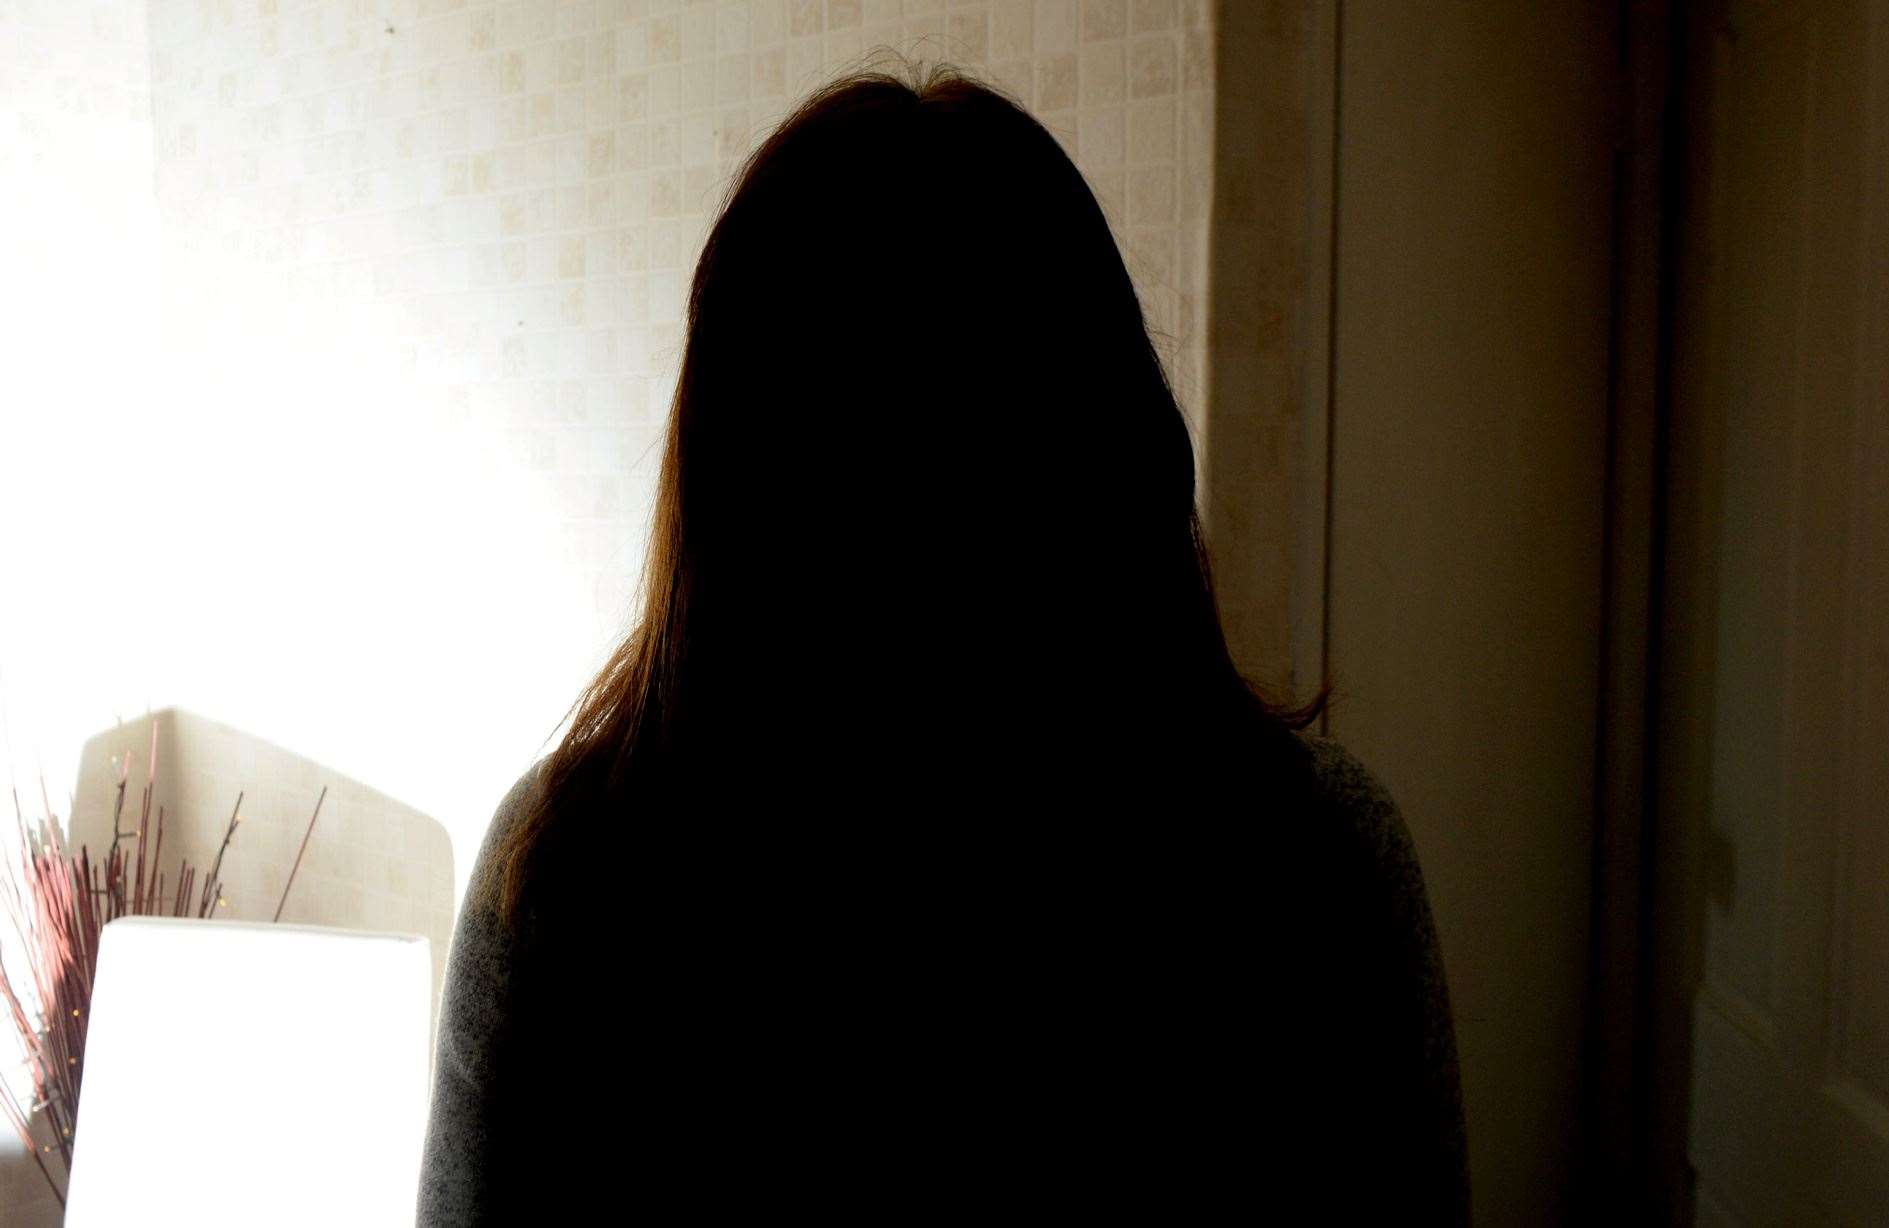 The domestic abuse victim who is considering lodging an appeal against a court sentence.